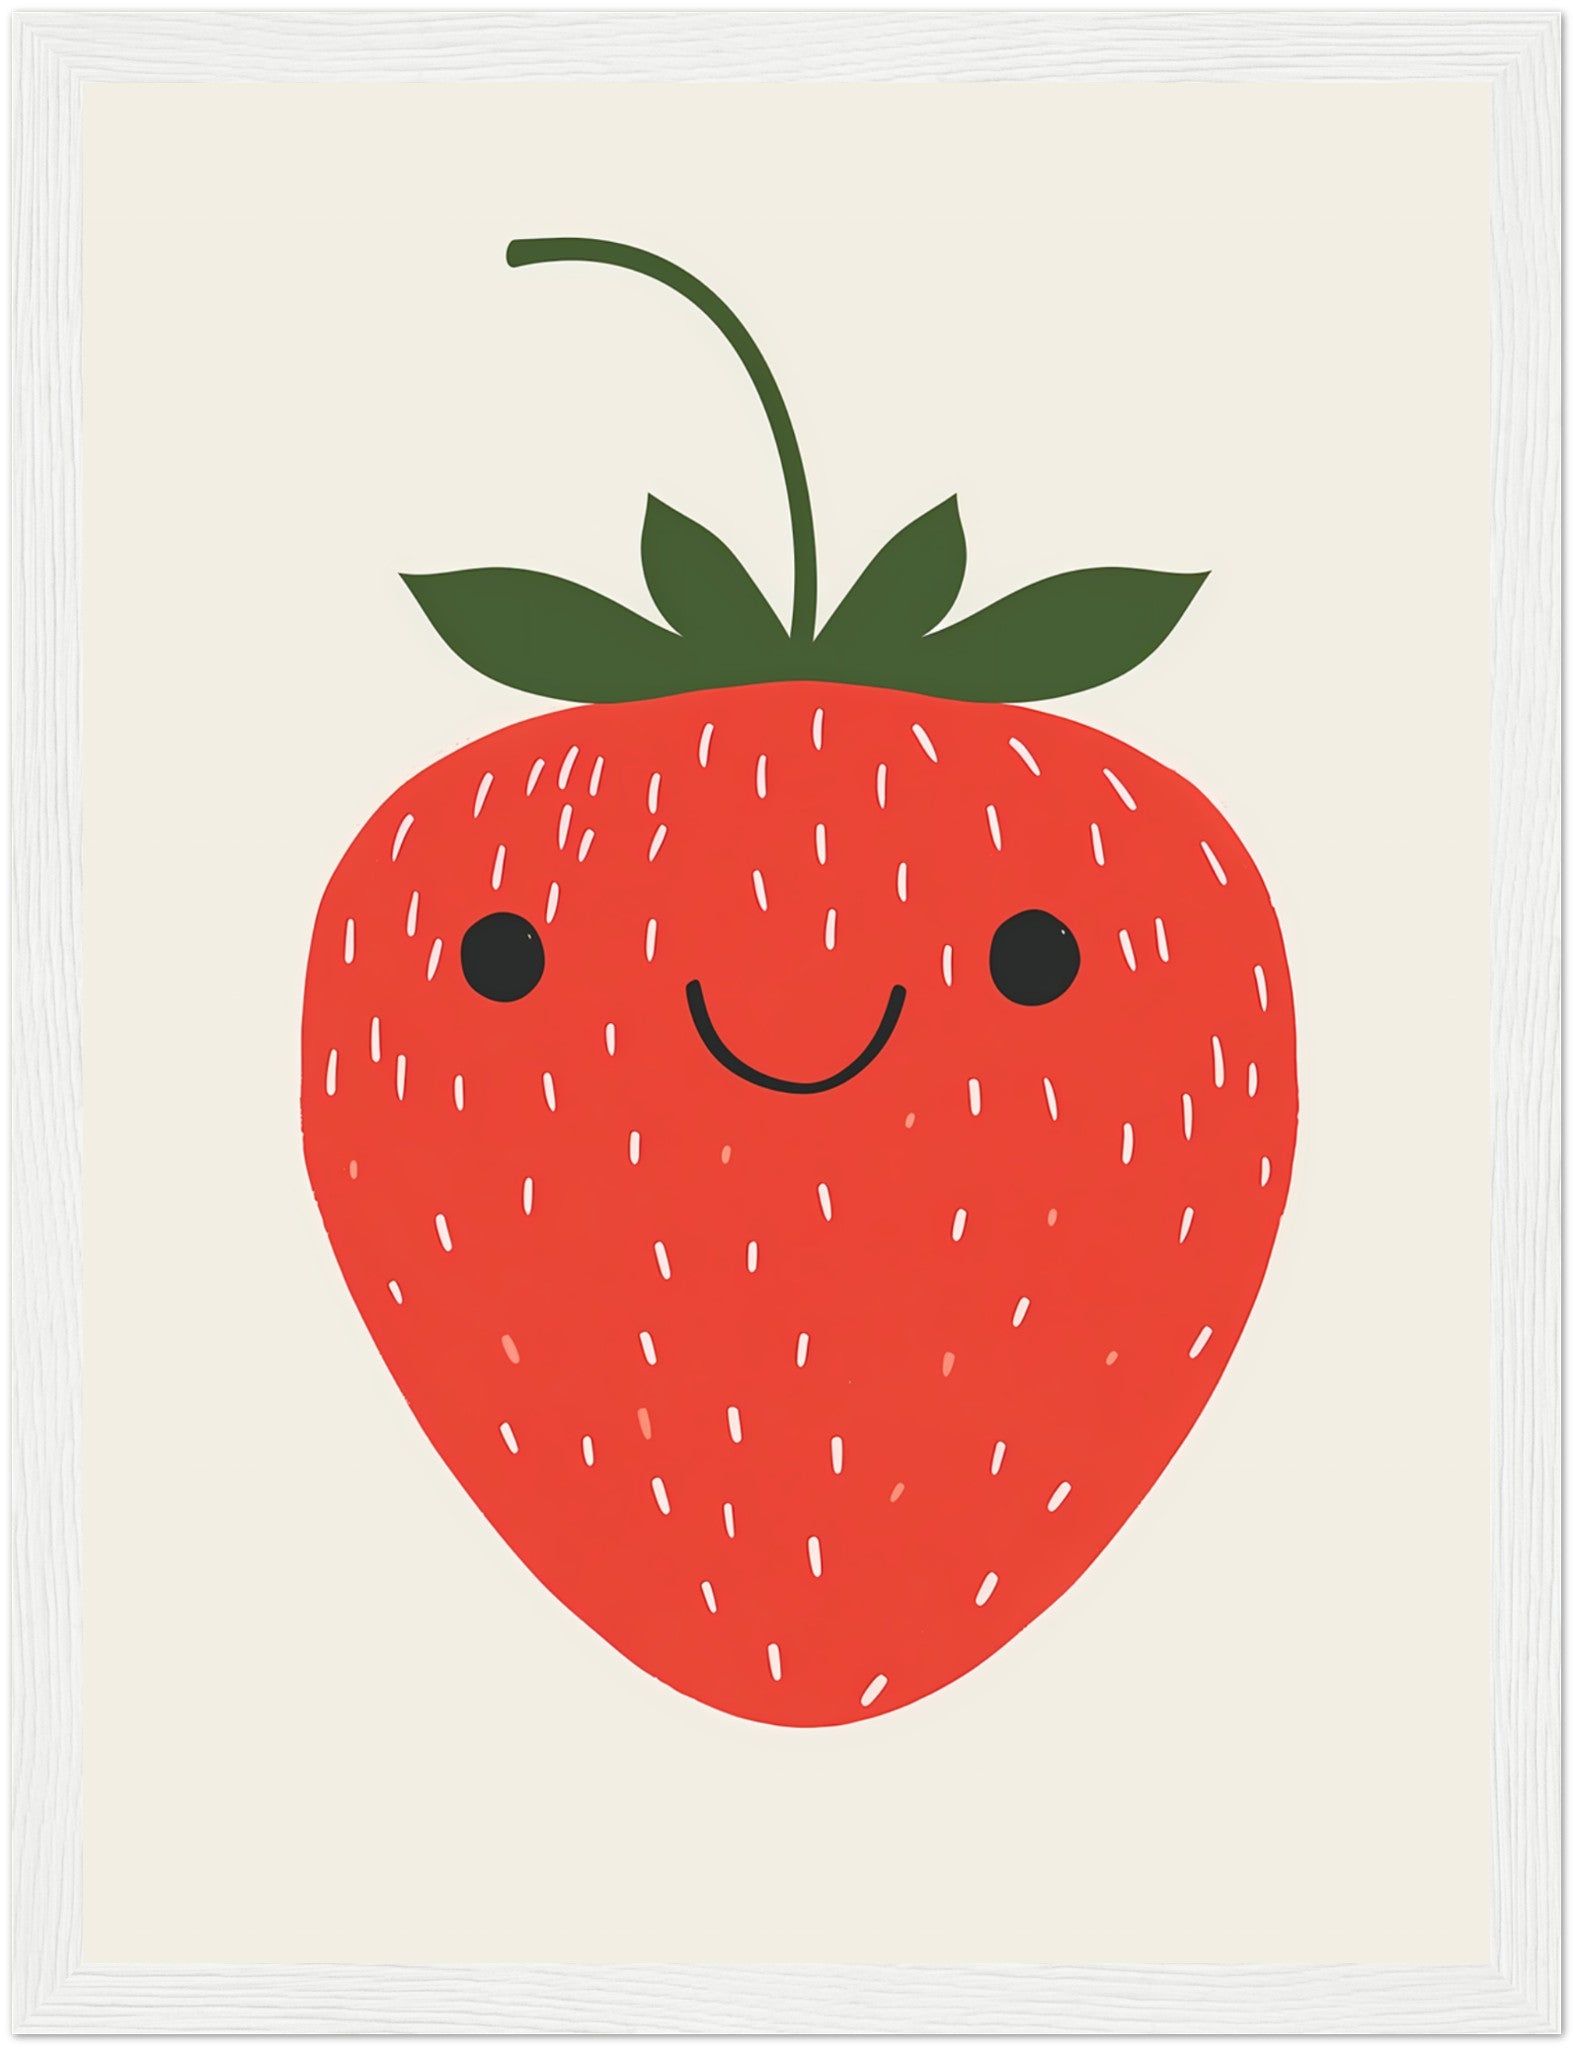 Illustration of a smiling strawberry in a frame.